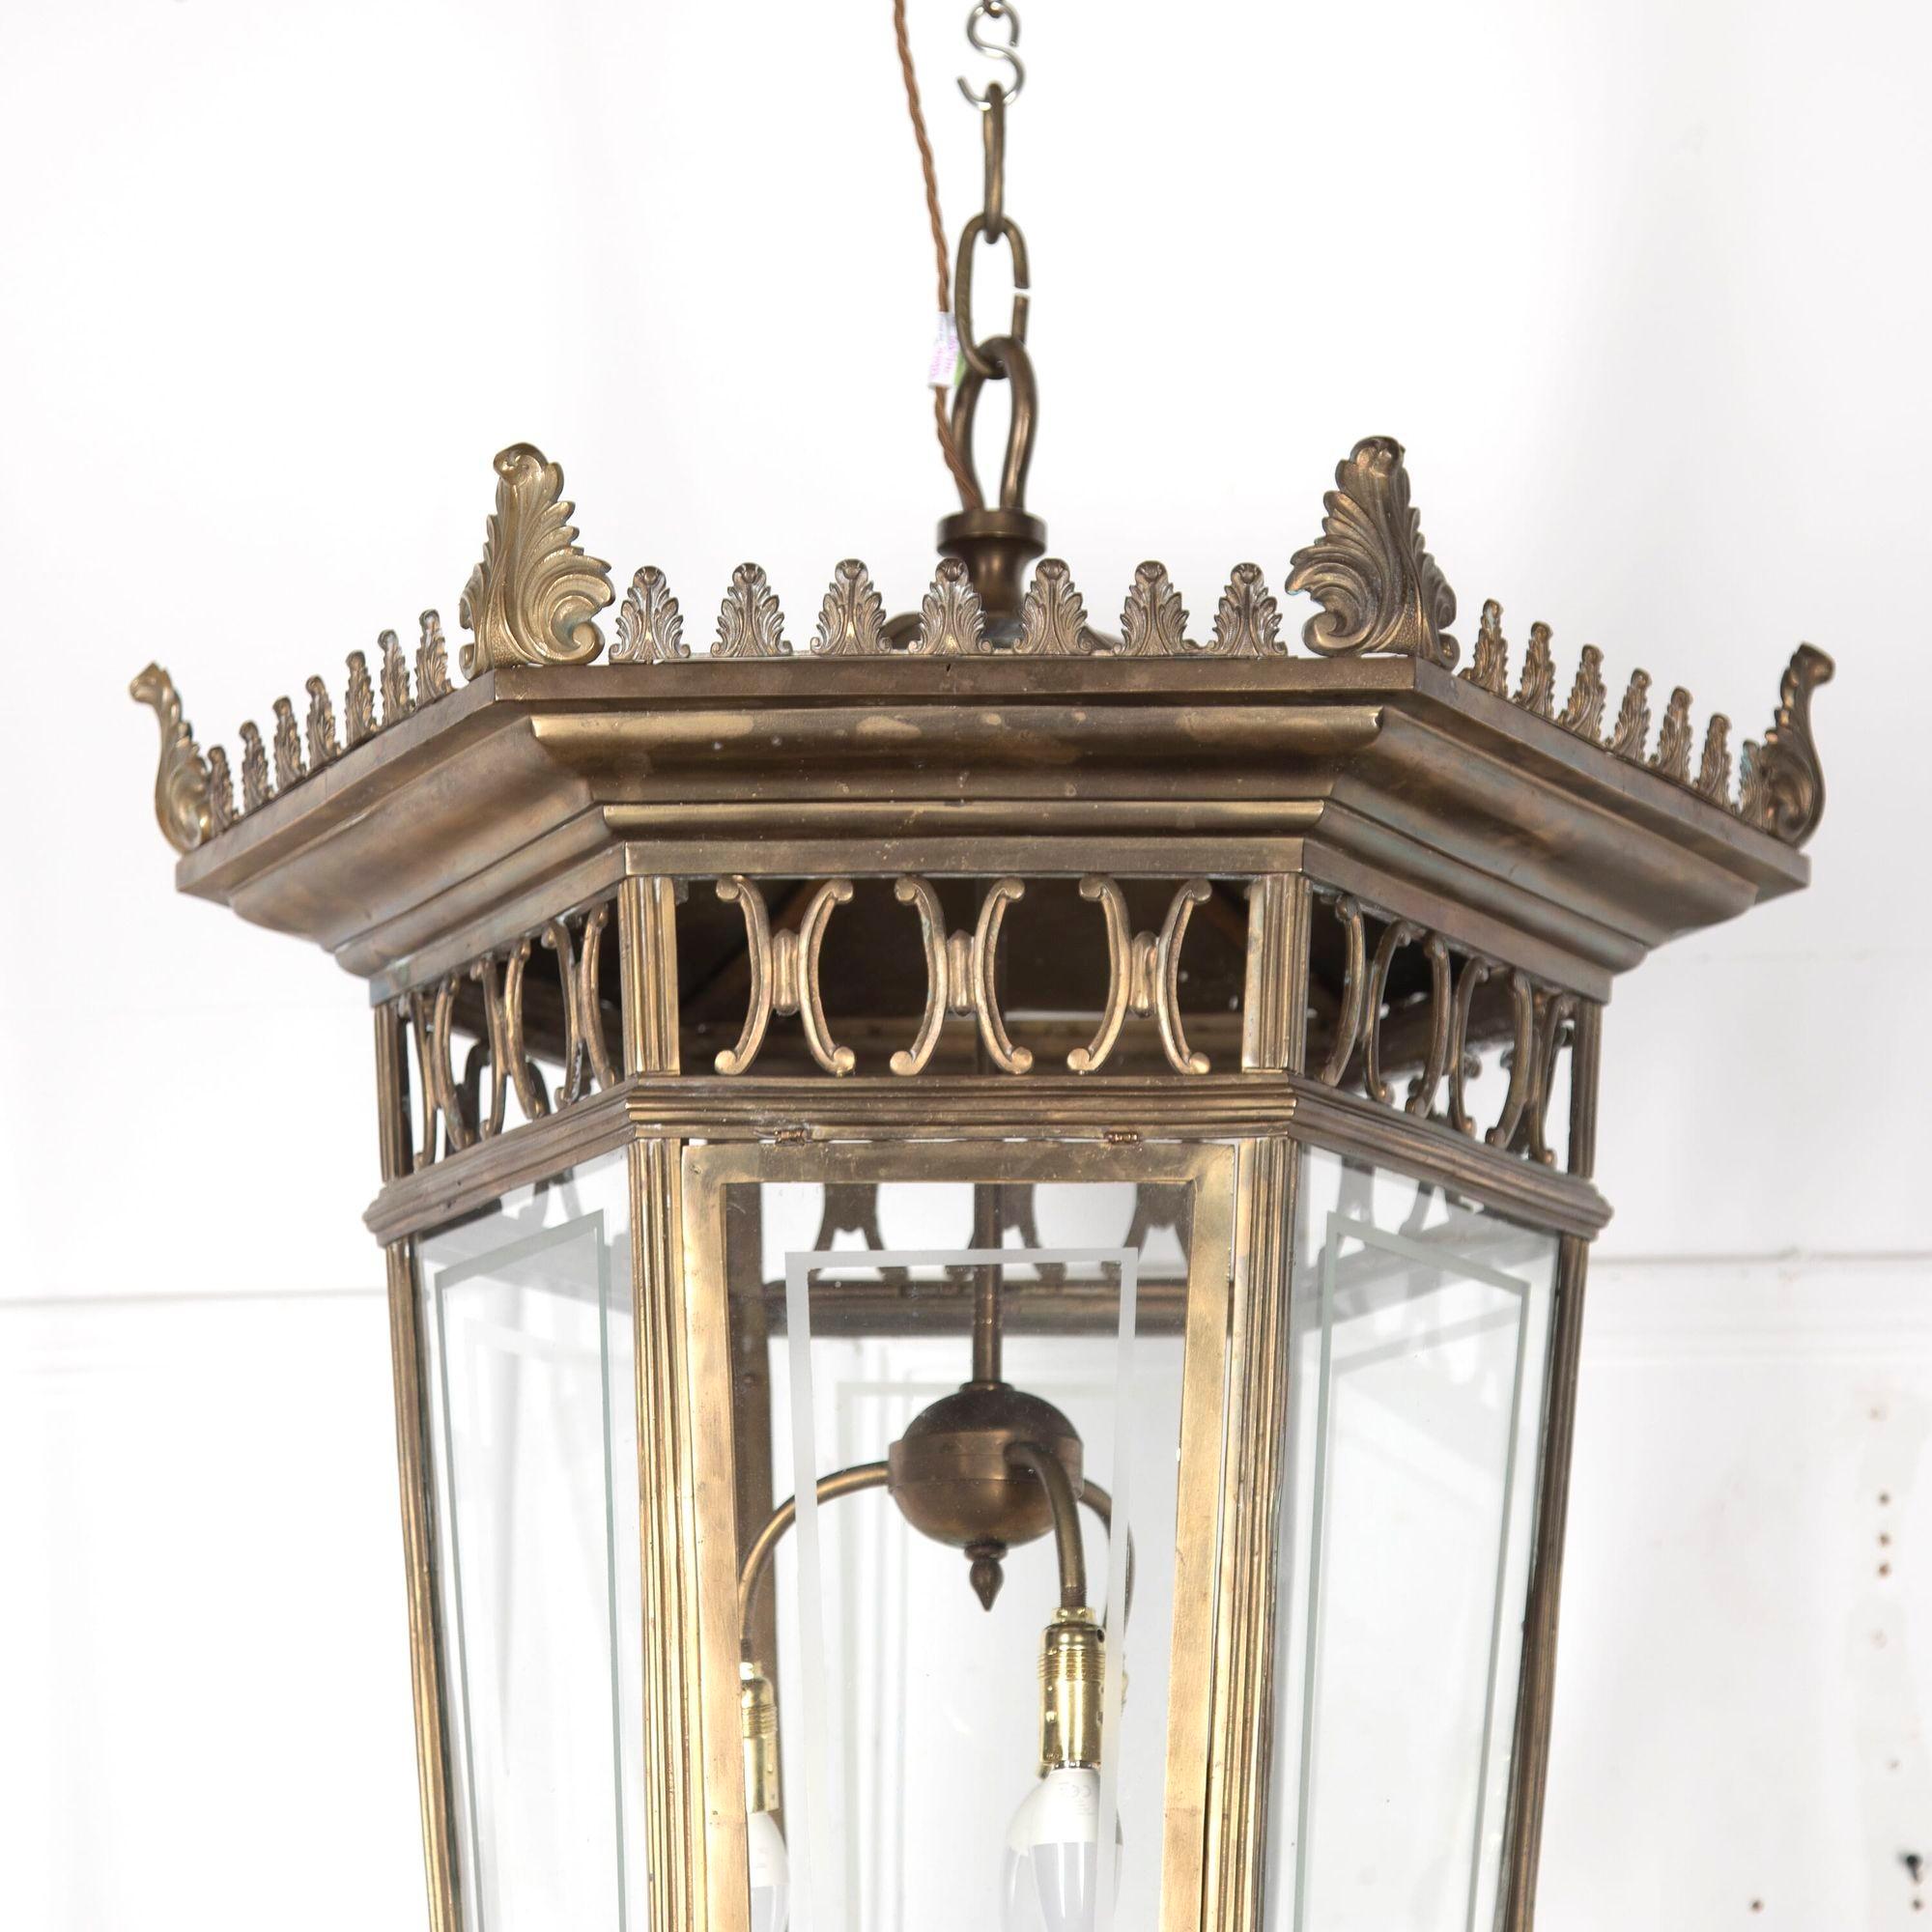 Impressive 20th century French brass lantern of large proportion.
This lantern is of good quality with etched glass panels, and an opening door, and has been rewired with three bulb holders.